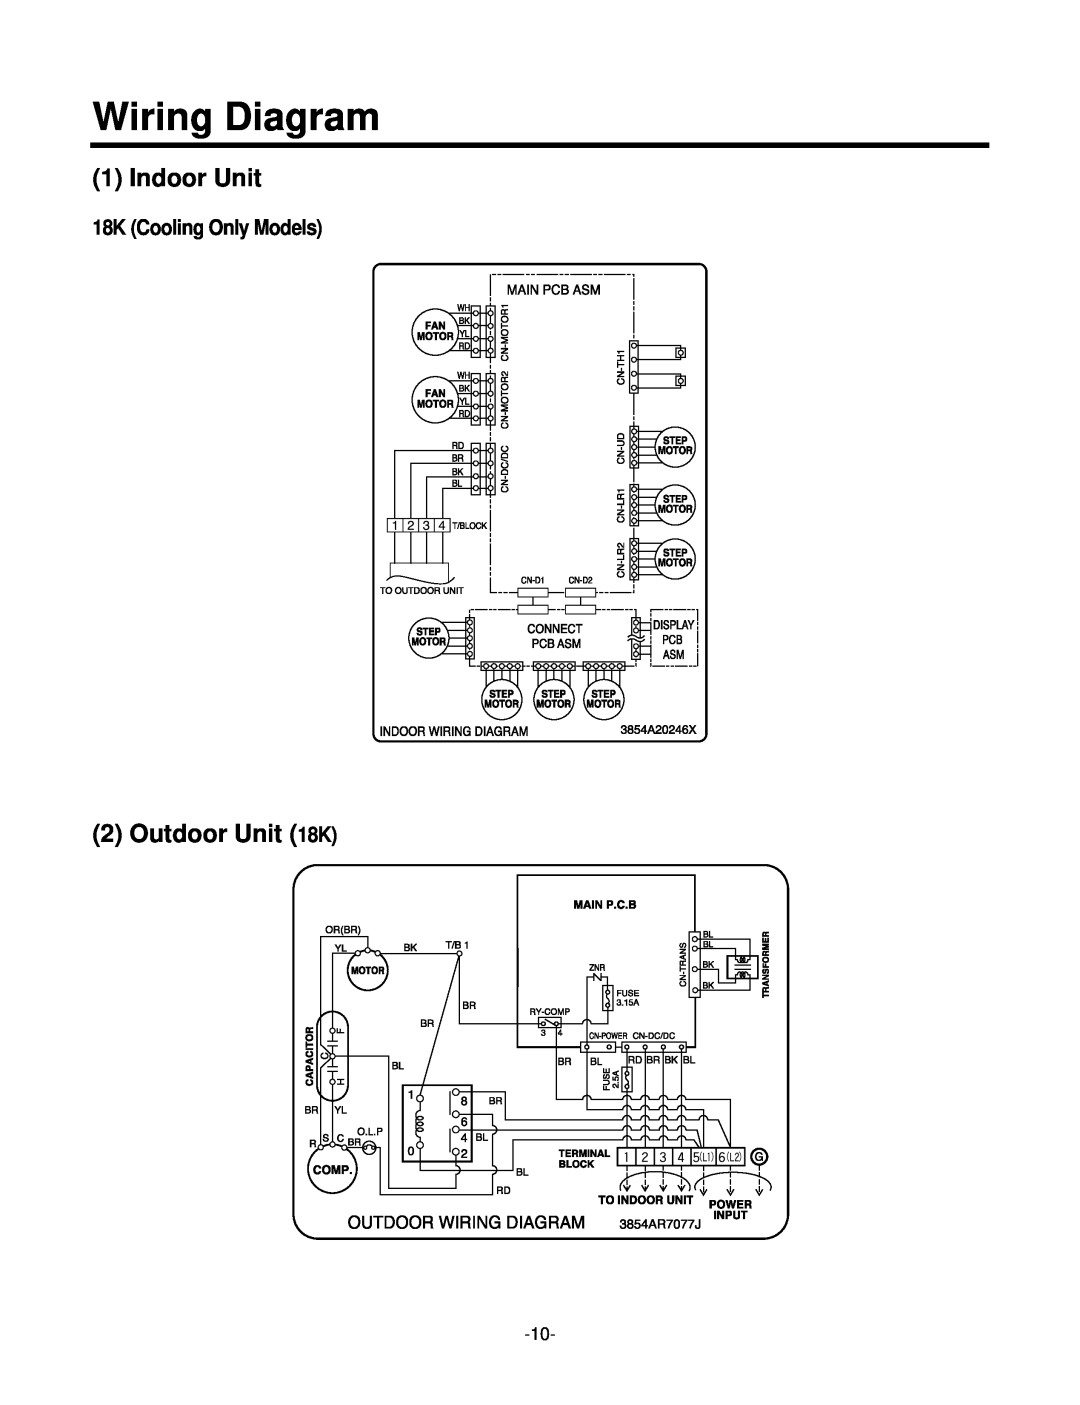 LG Electronics LSC183VMA service manual Wiring Diagram, 18K Cooling Only Models, Indoor Unit, Outdoor Unit 18K 